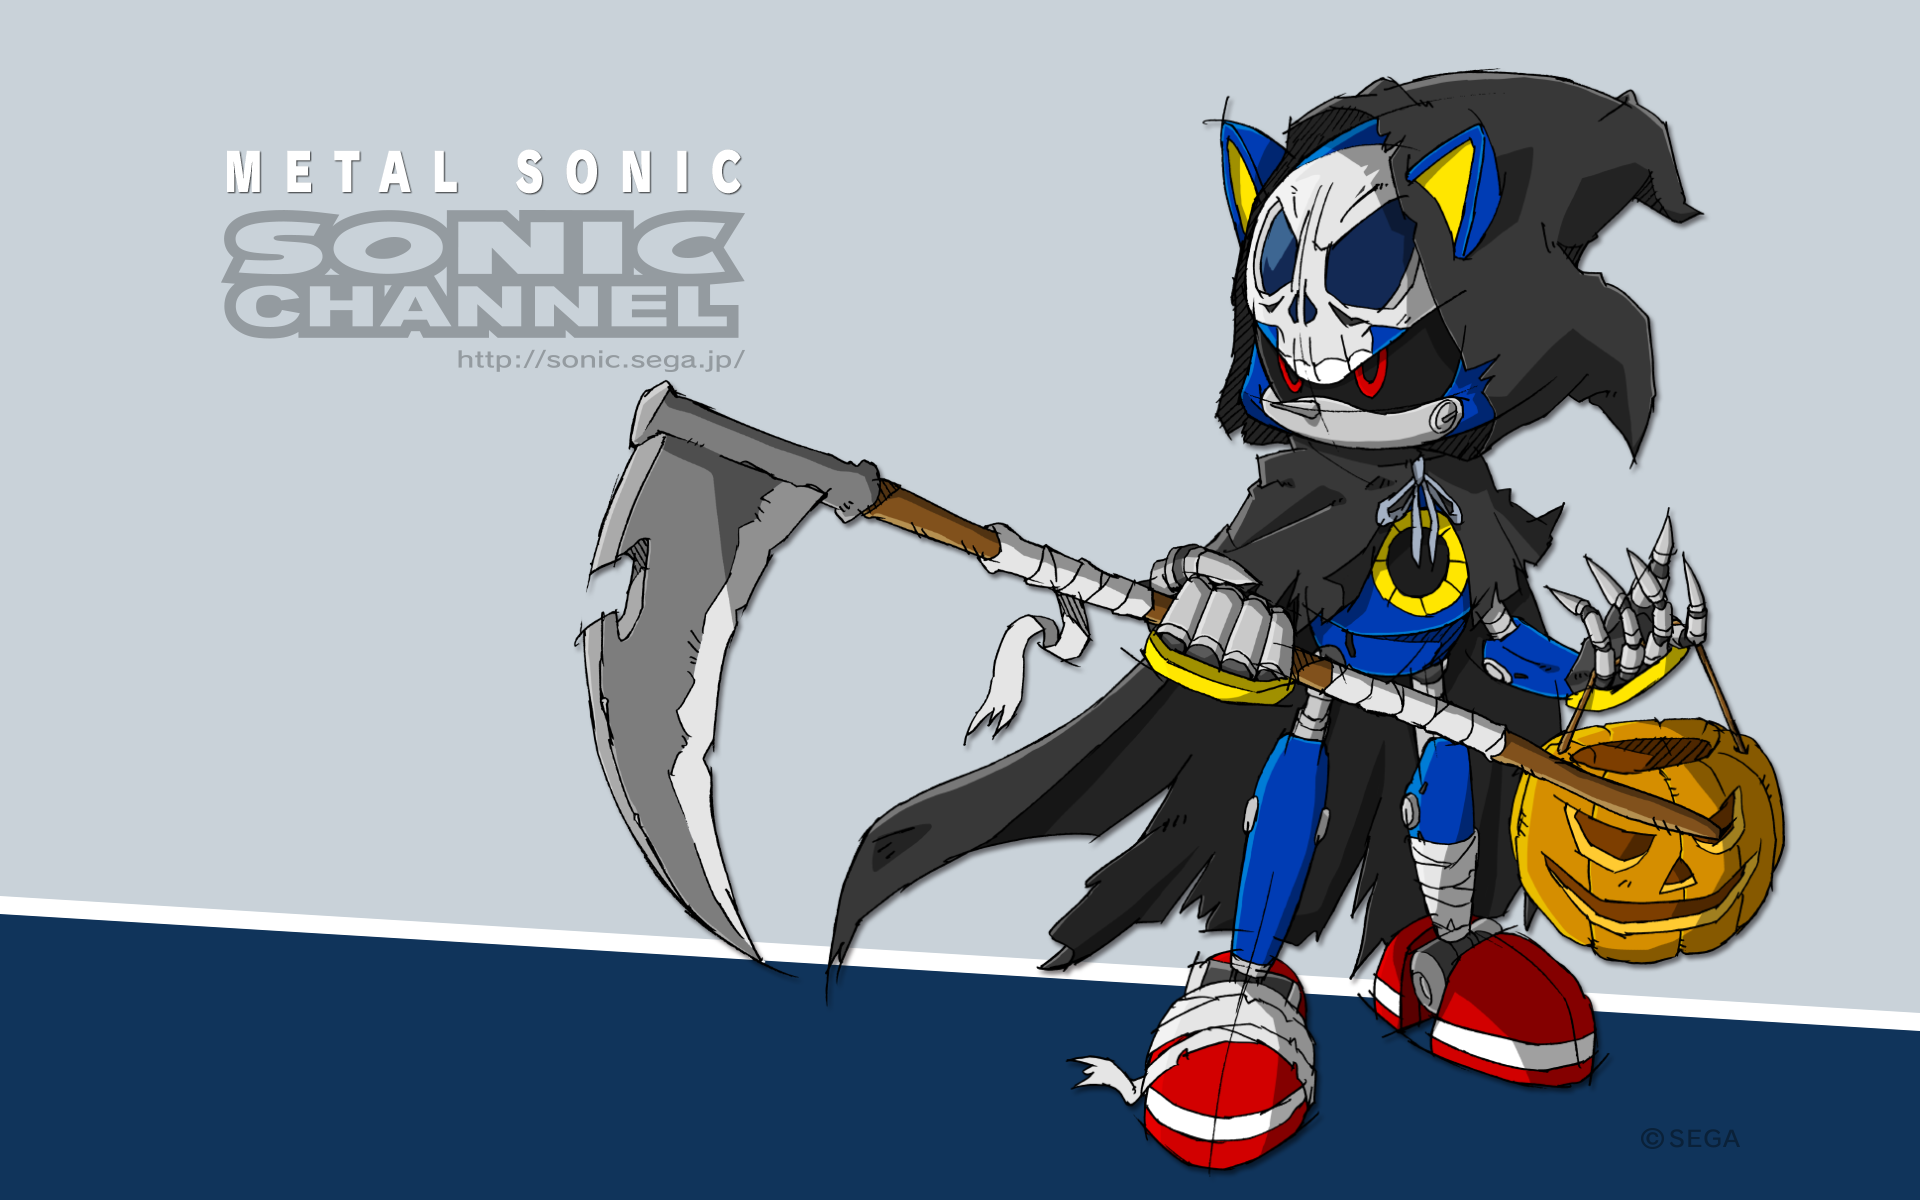 download This Wallpaper For Pc] - Metal Sonic Sonic Channel - 1920x1200  Wallpaper 